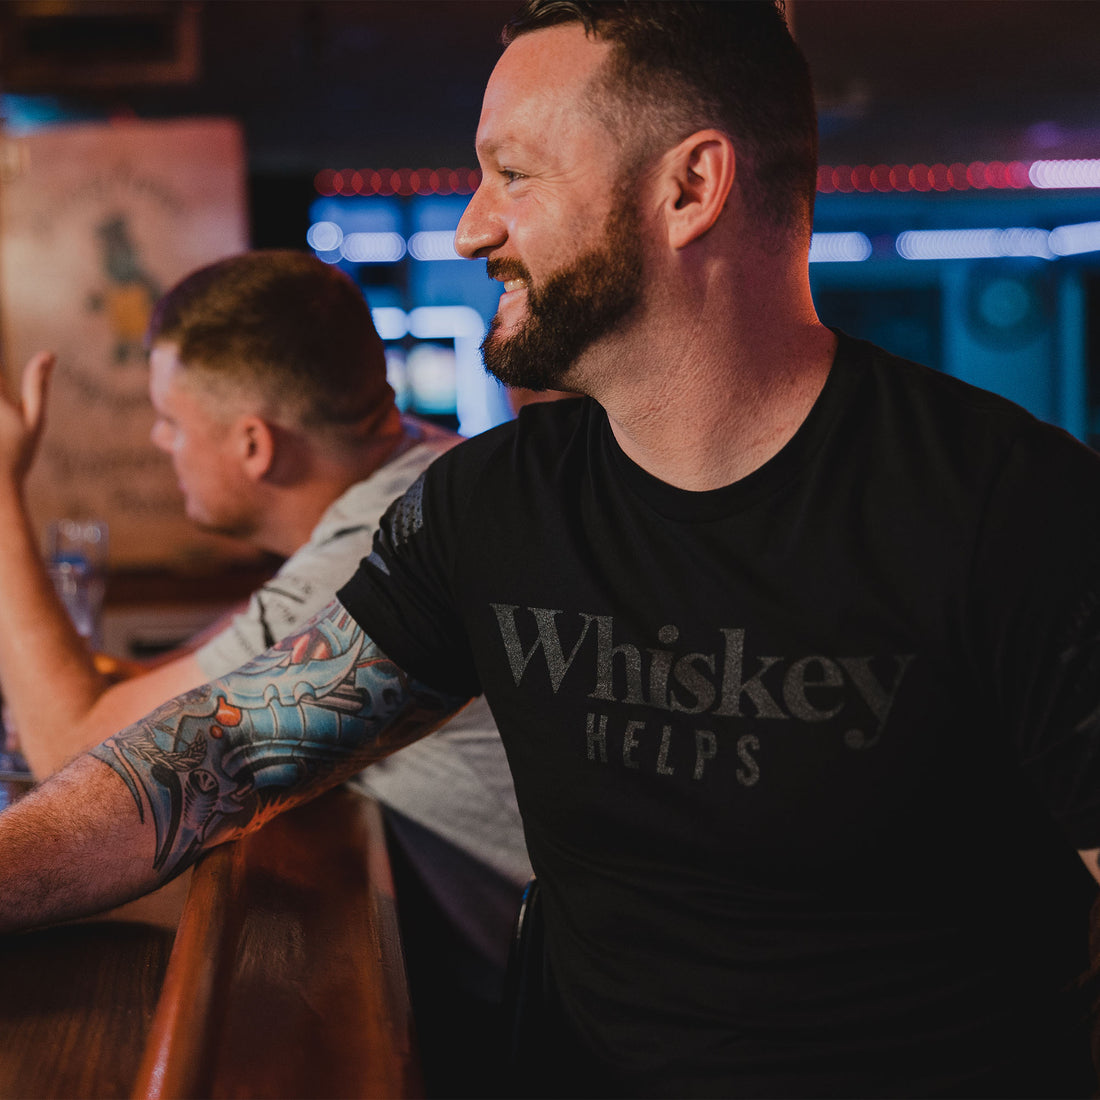 Whiskey Helps Graphic Alcohol T-Shirt 